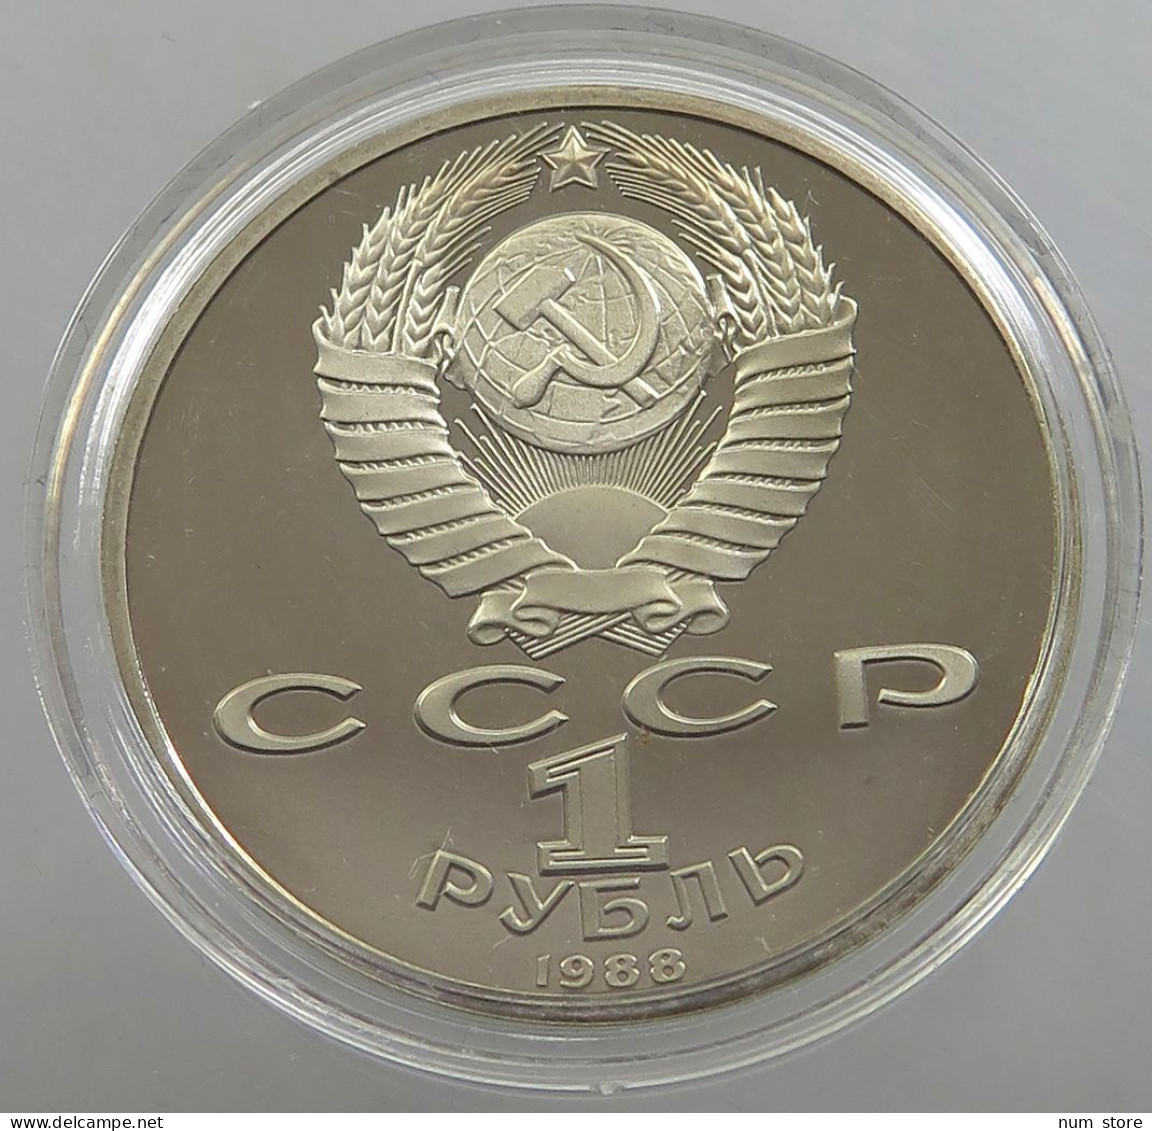 RUSSIA USSR 1 ROUBLE 1988 GORKI PROOF #sm14 0537 - Russland